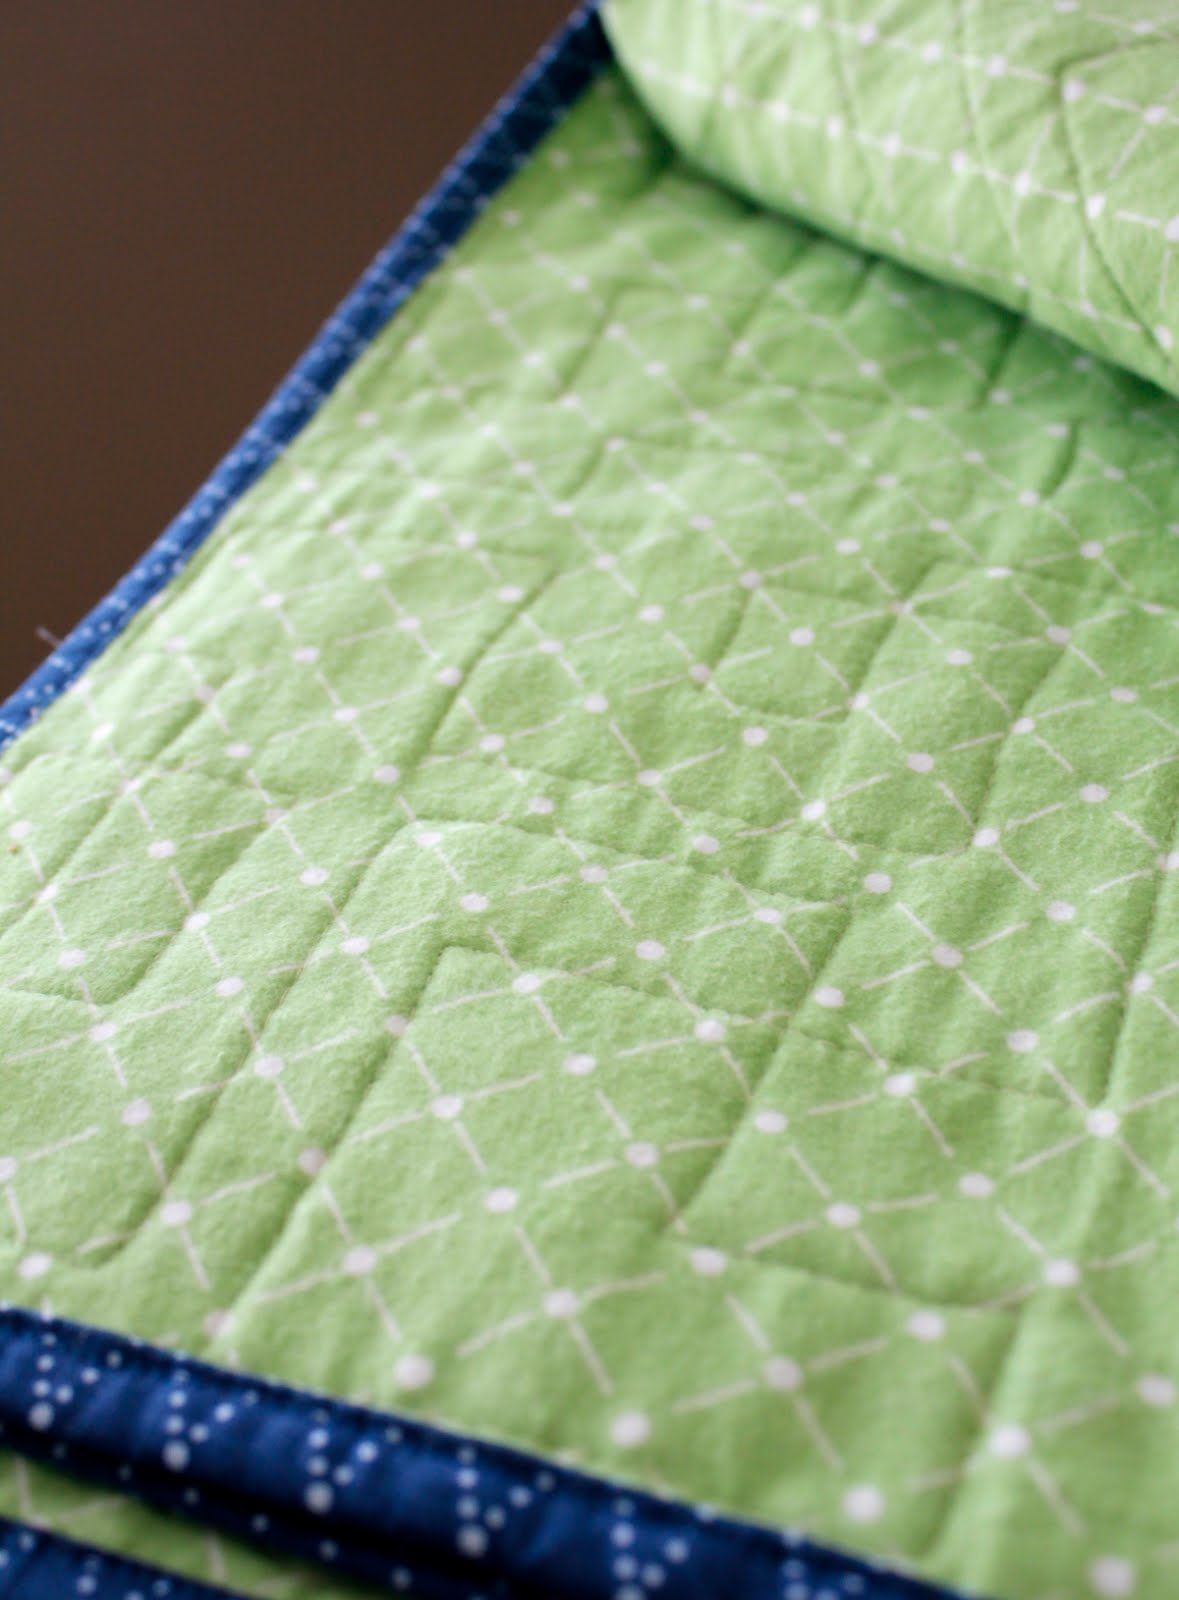 10 Easy Quilting Designs for Beginners - Quilting Wemple